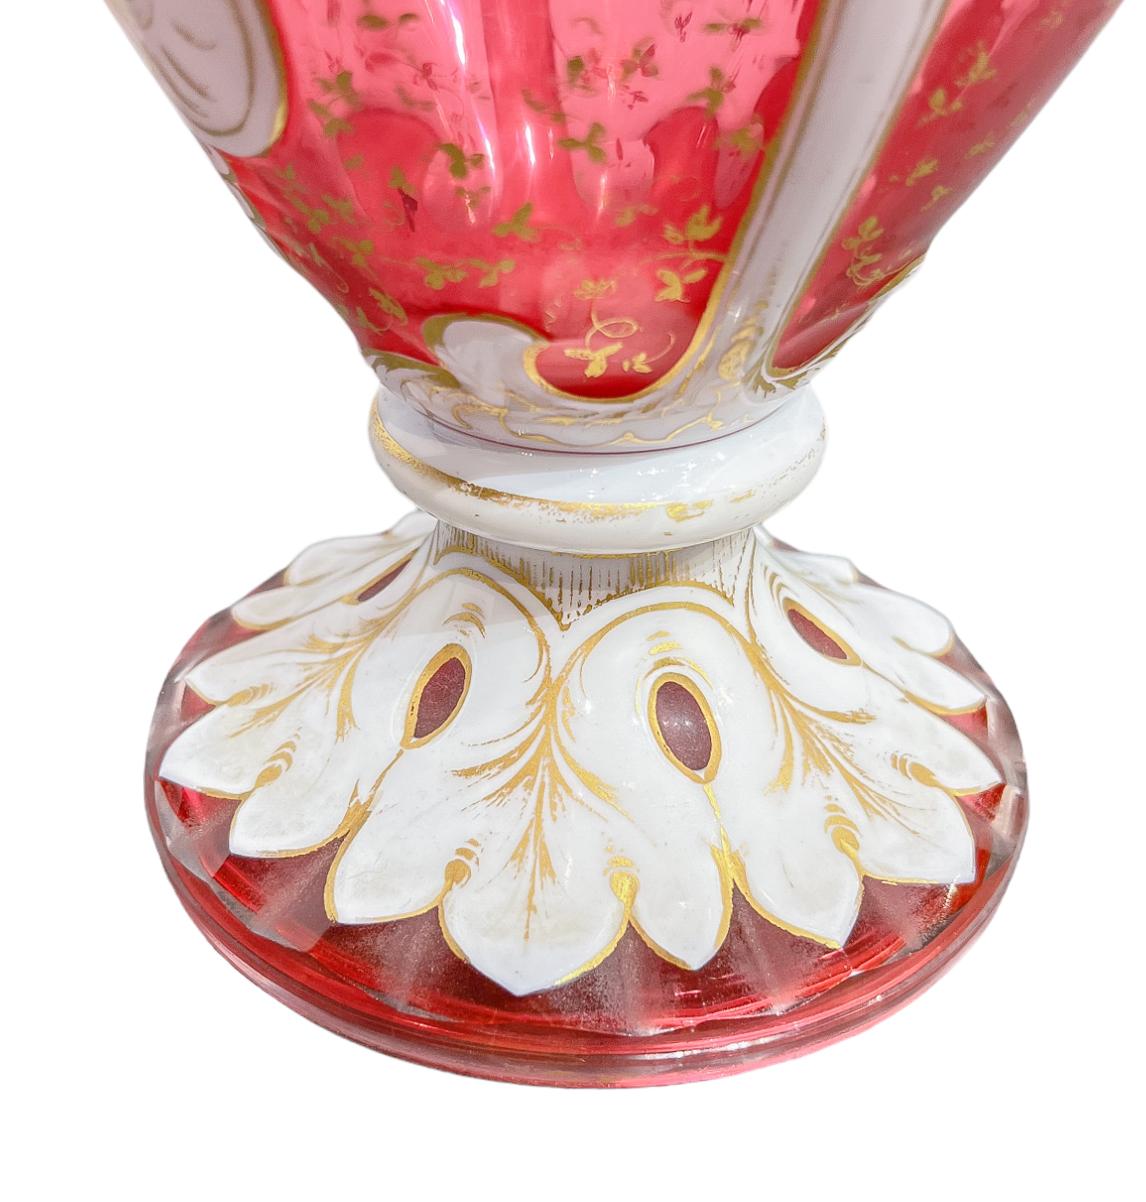  Bohemian Glass Pitcher with Jewel Painting and White Enamel  For Sale 3